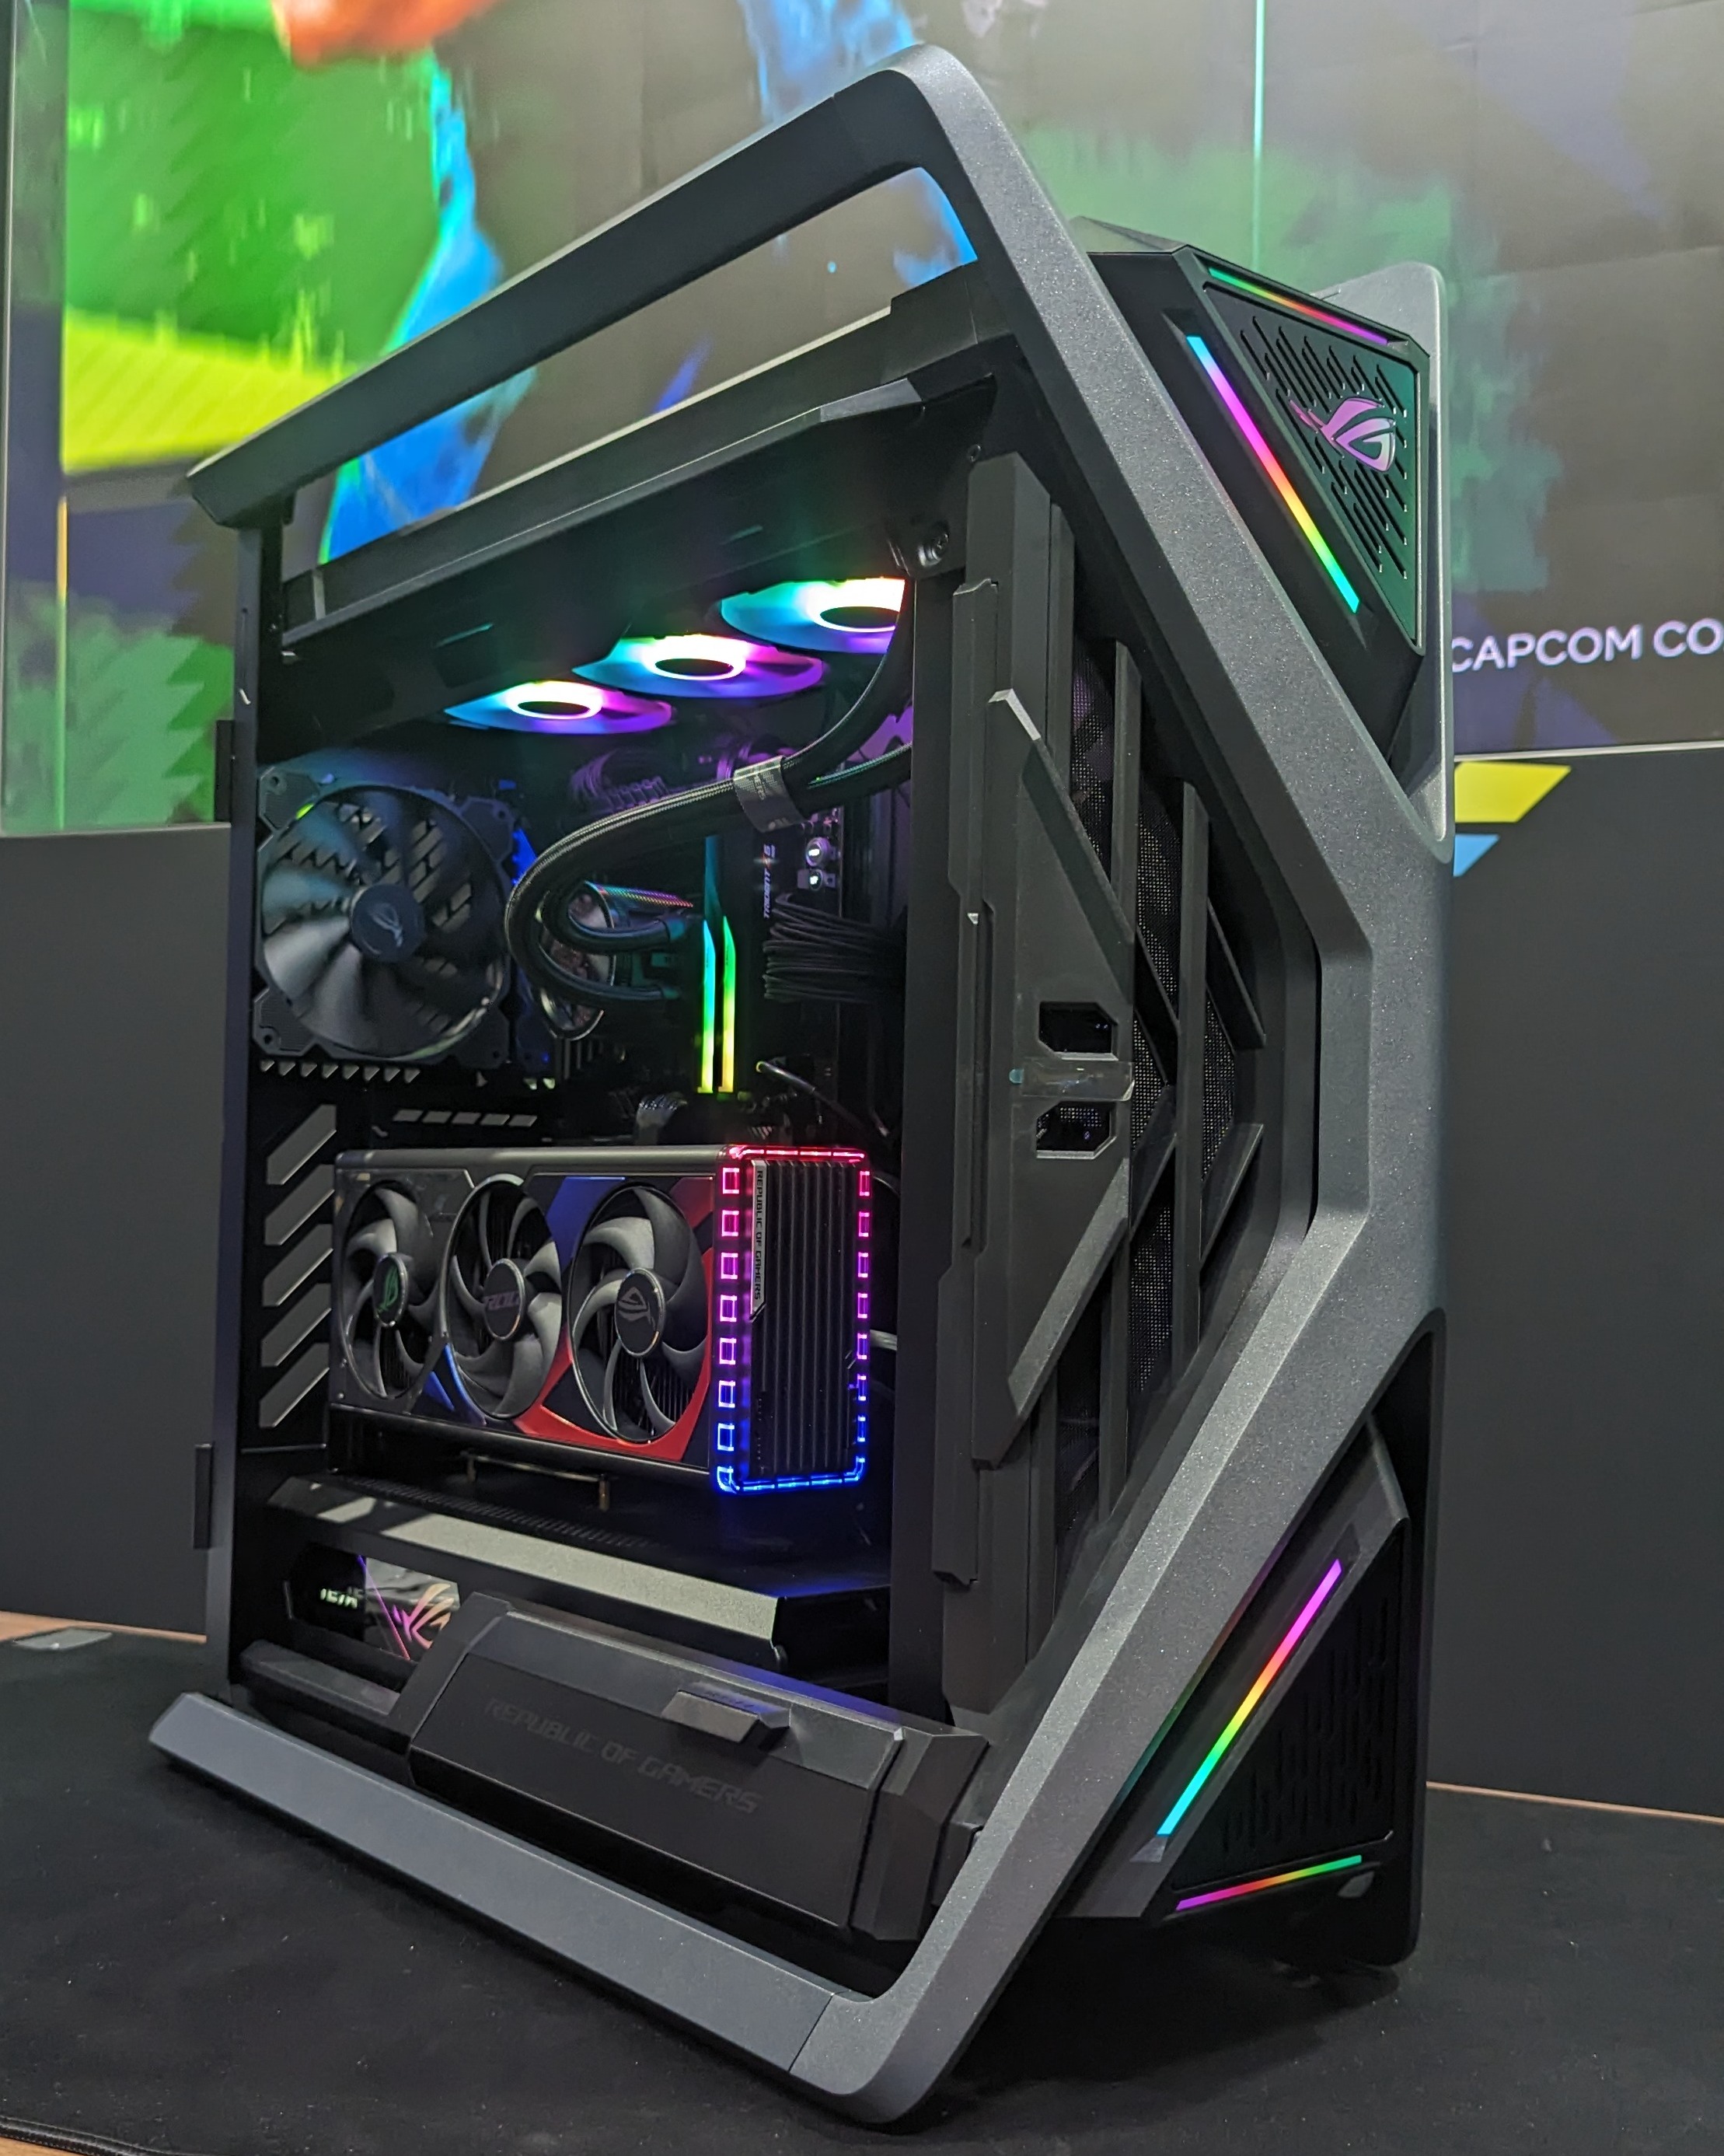 ROG North America on X: We got to show off the ROG Hyperion a few